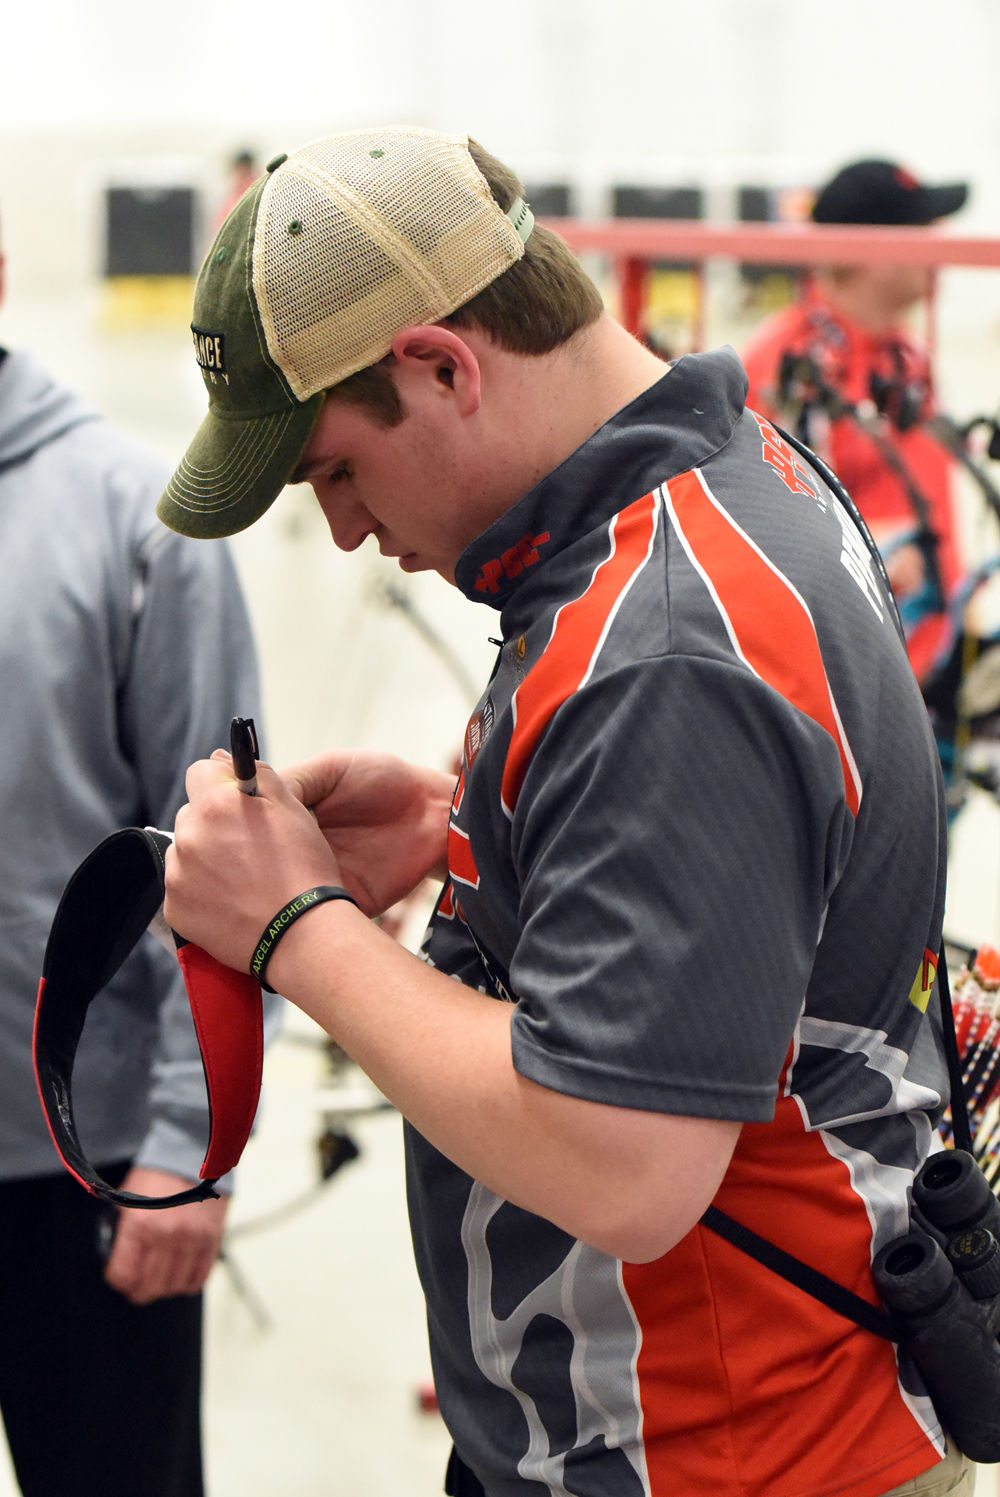 Archery: 22-Year-Old Comes Up Just Short Of $1M Prize